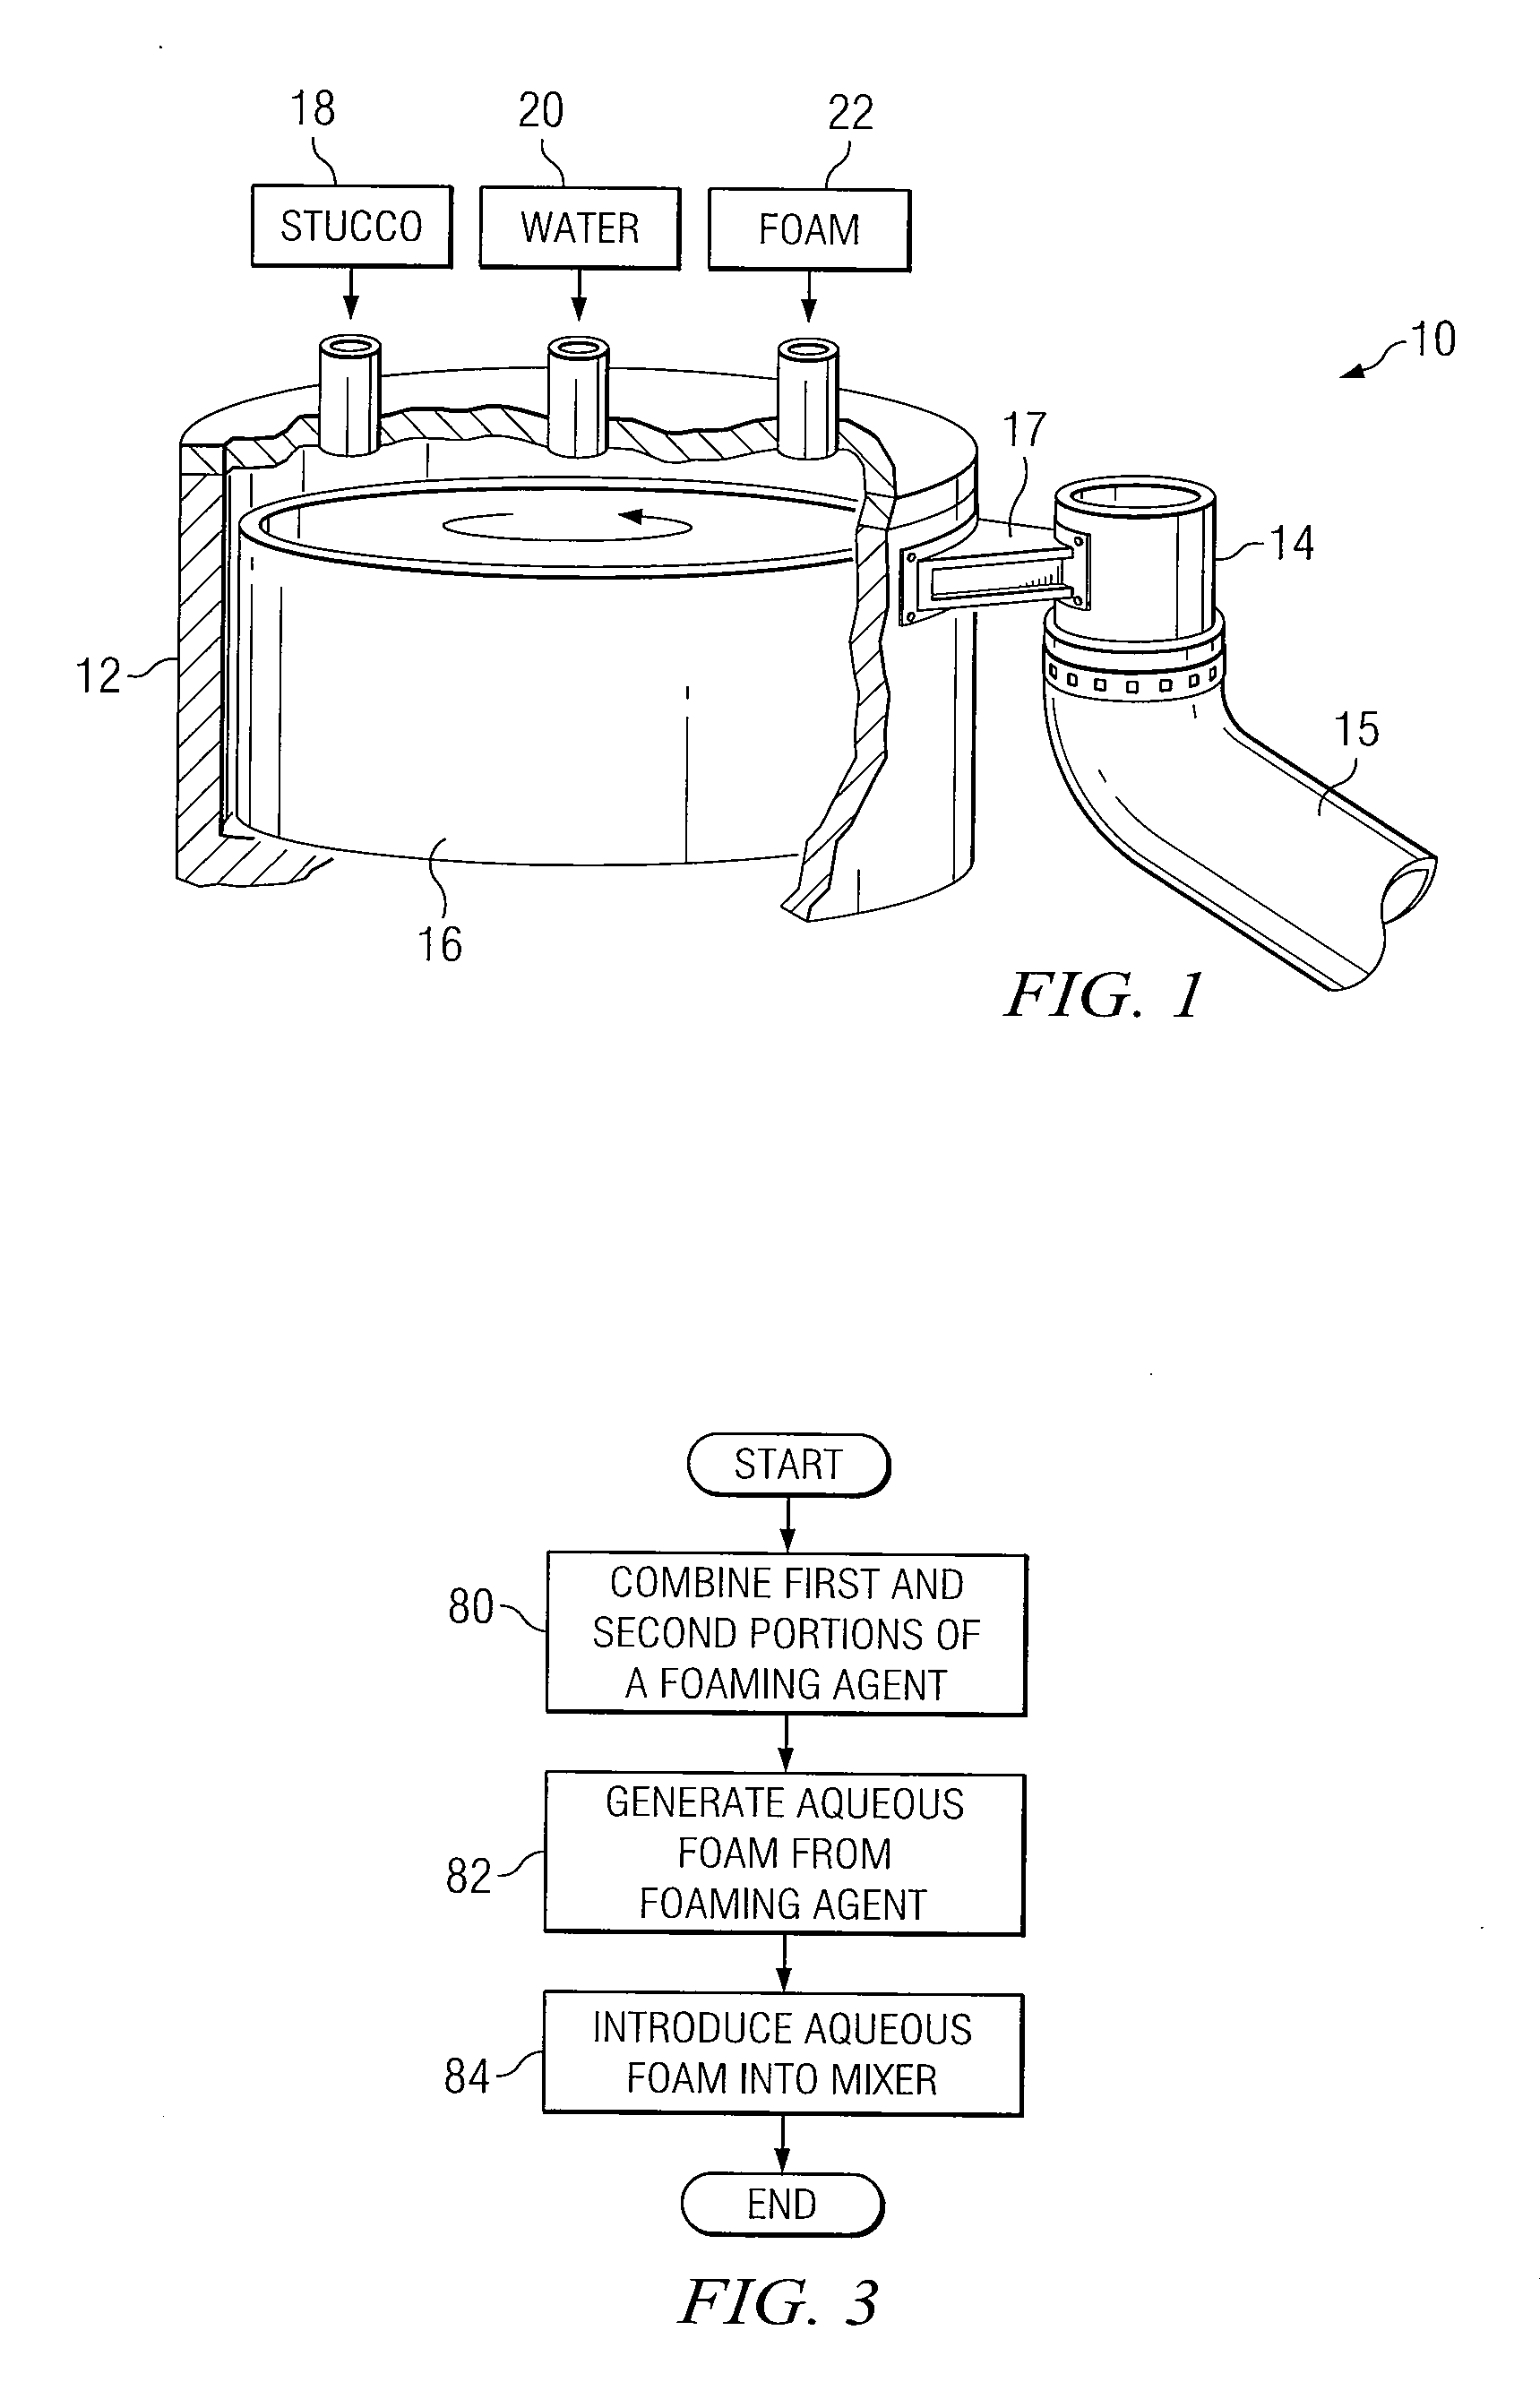 Method and System for Manufacturing Lightweight, High-Strength Gypsum Products